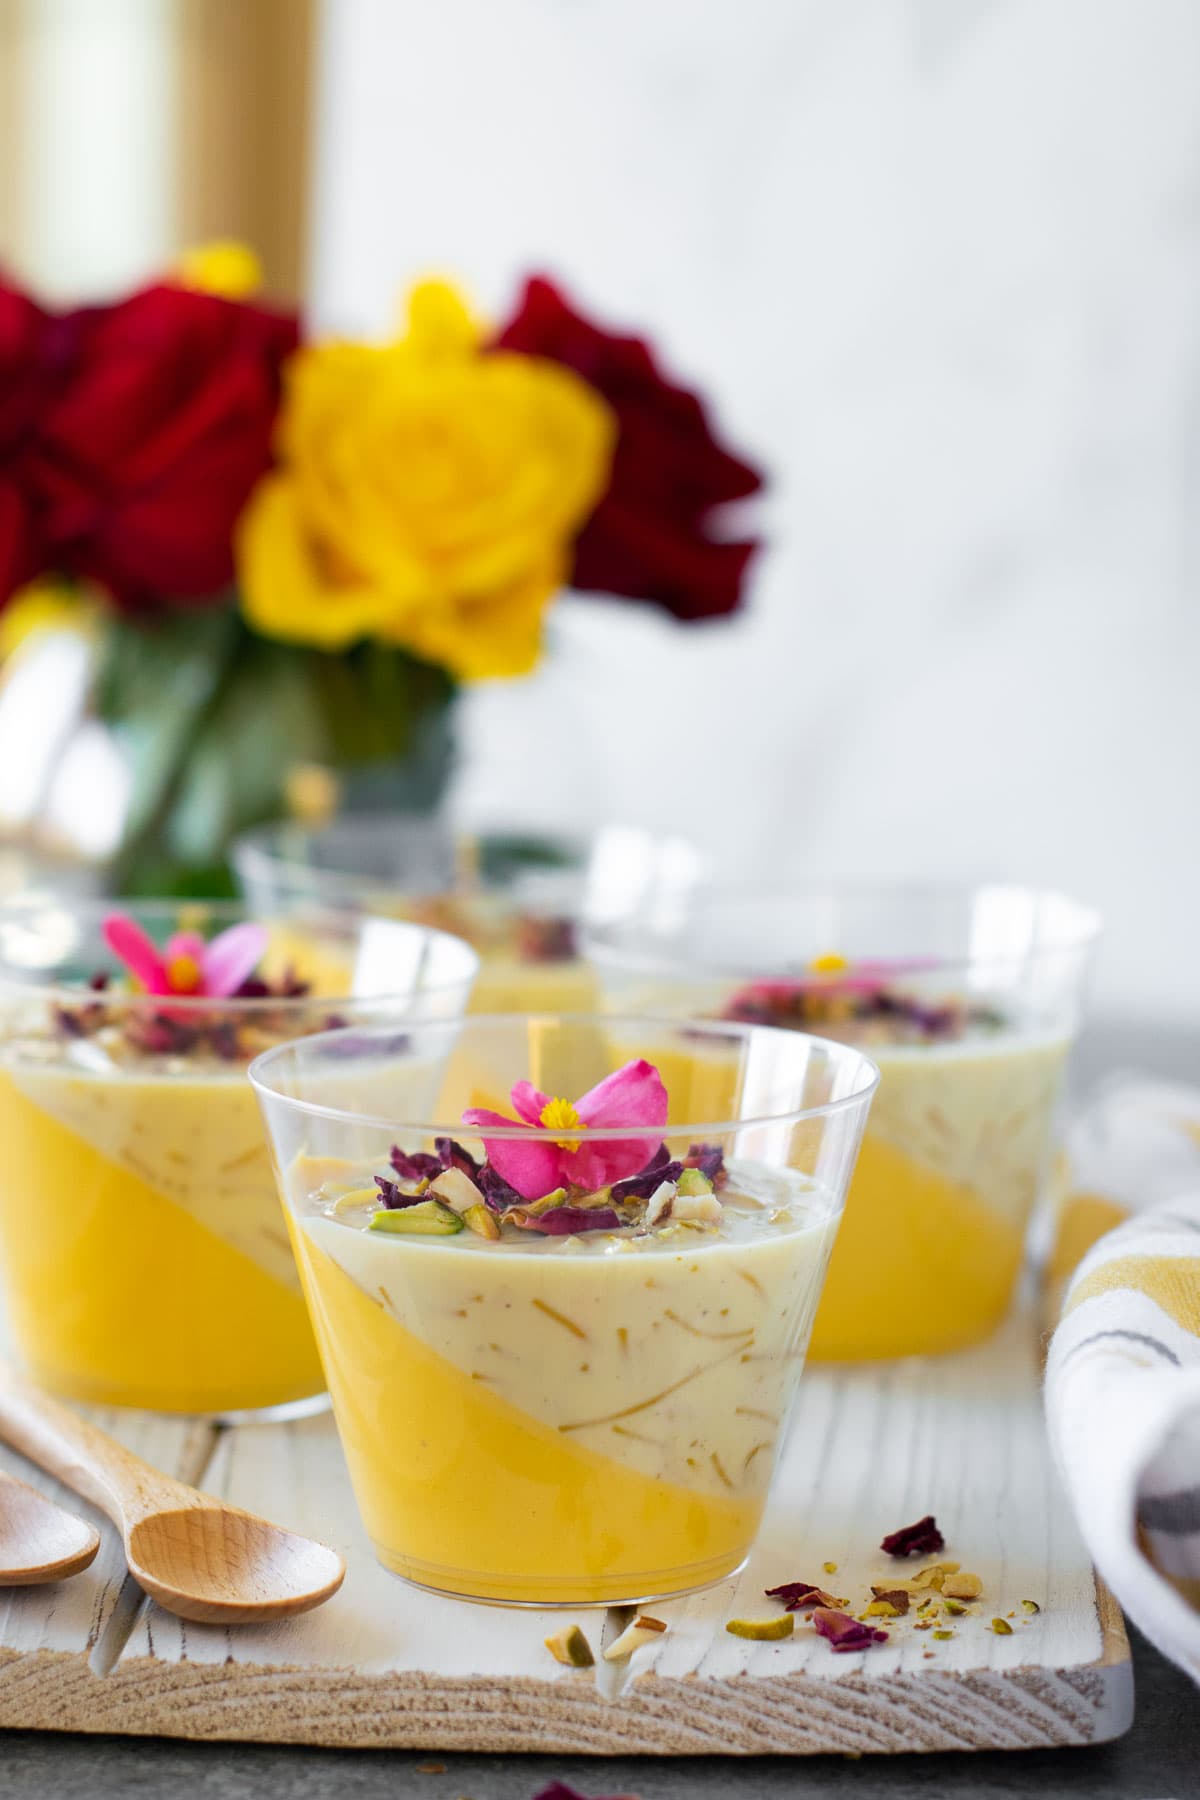 Mango Panna Cotta Seviyaan Kheer layered in a clear glass and garnished with nuts.